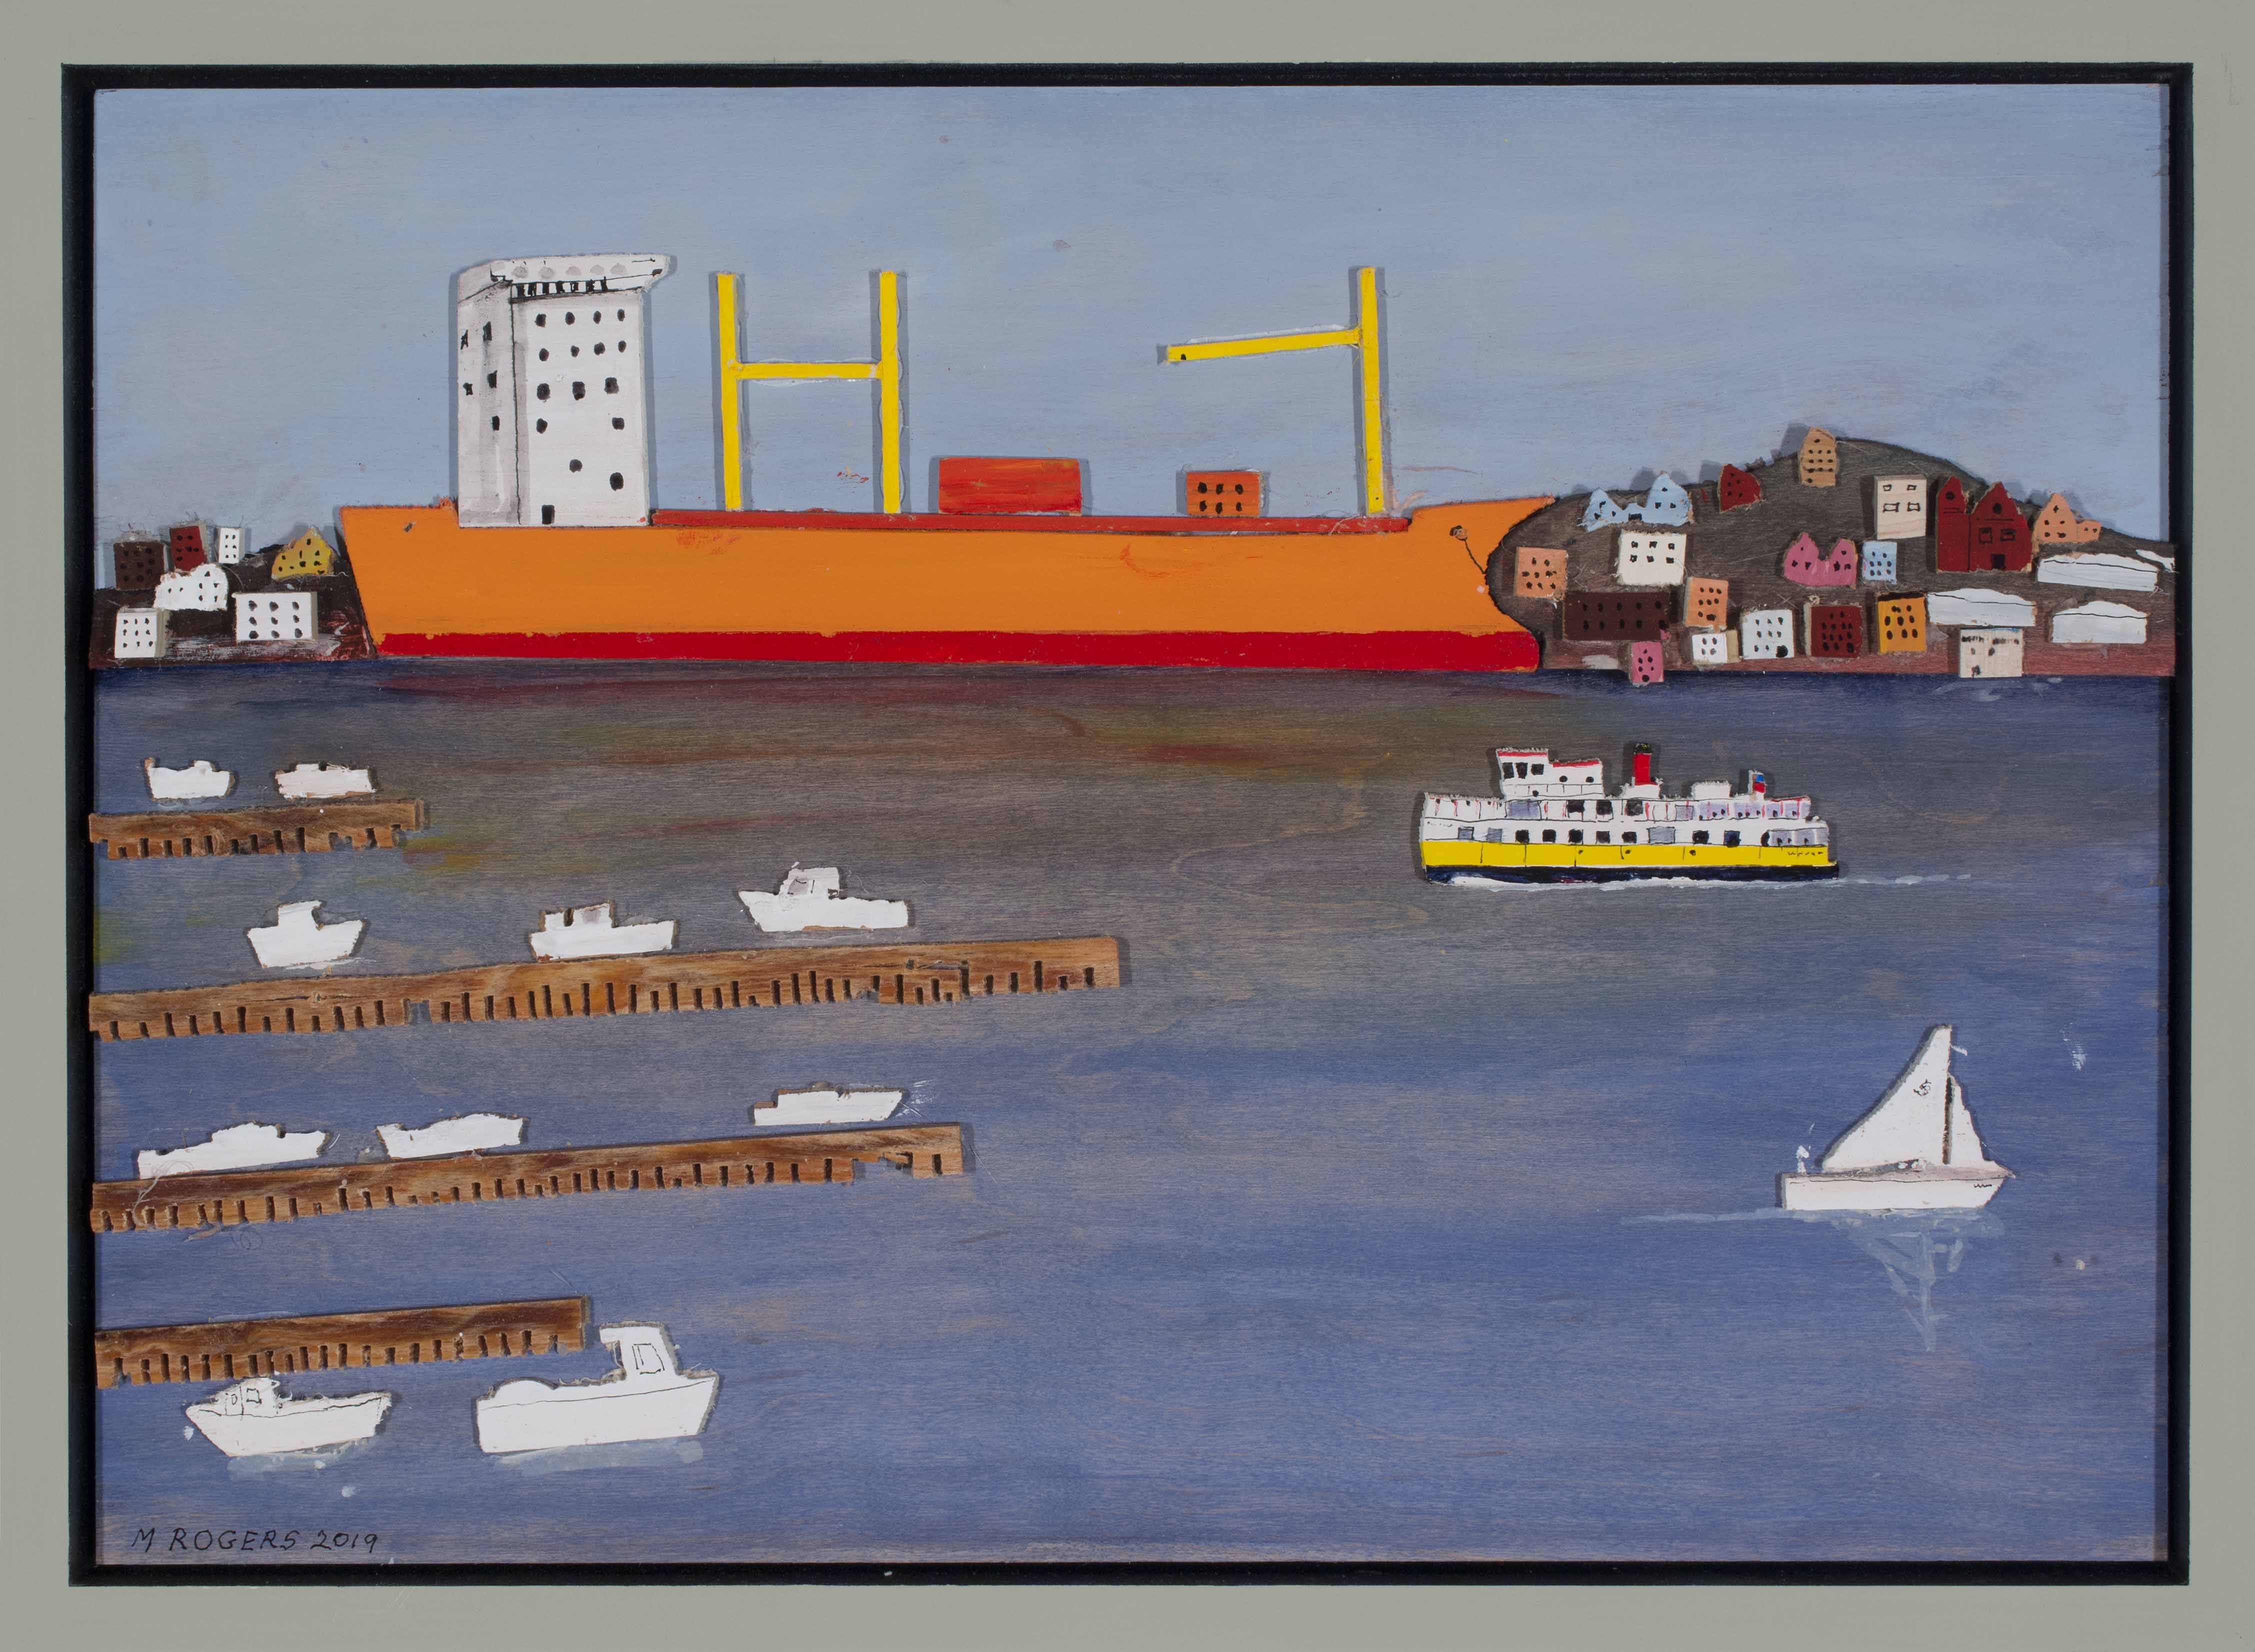 Portland Harbor, 2019, acrylic and ink on wood, 12 x 17 inches